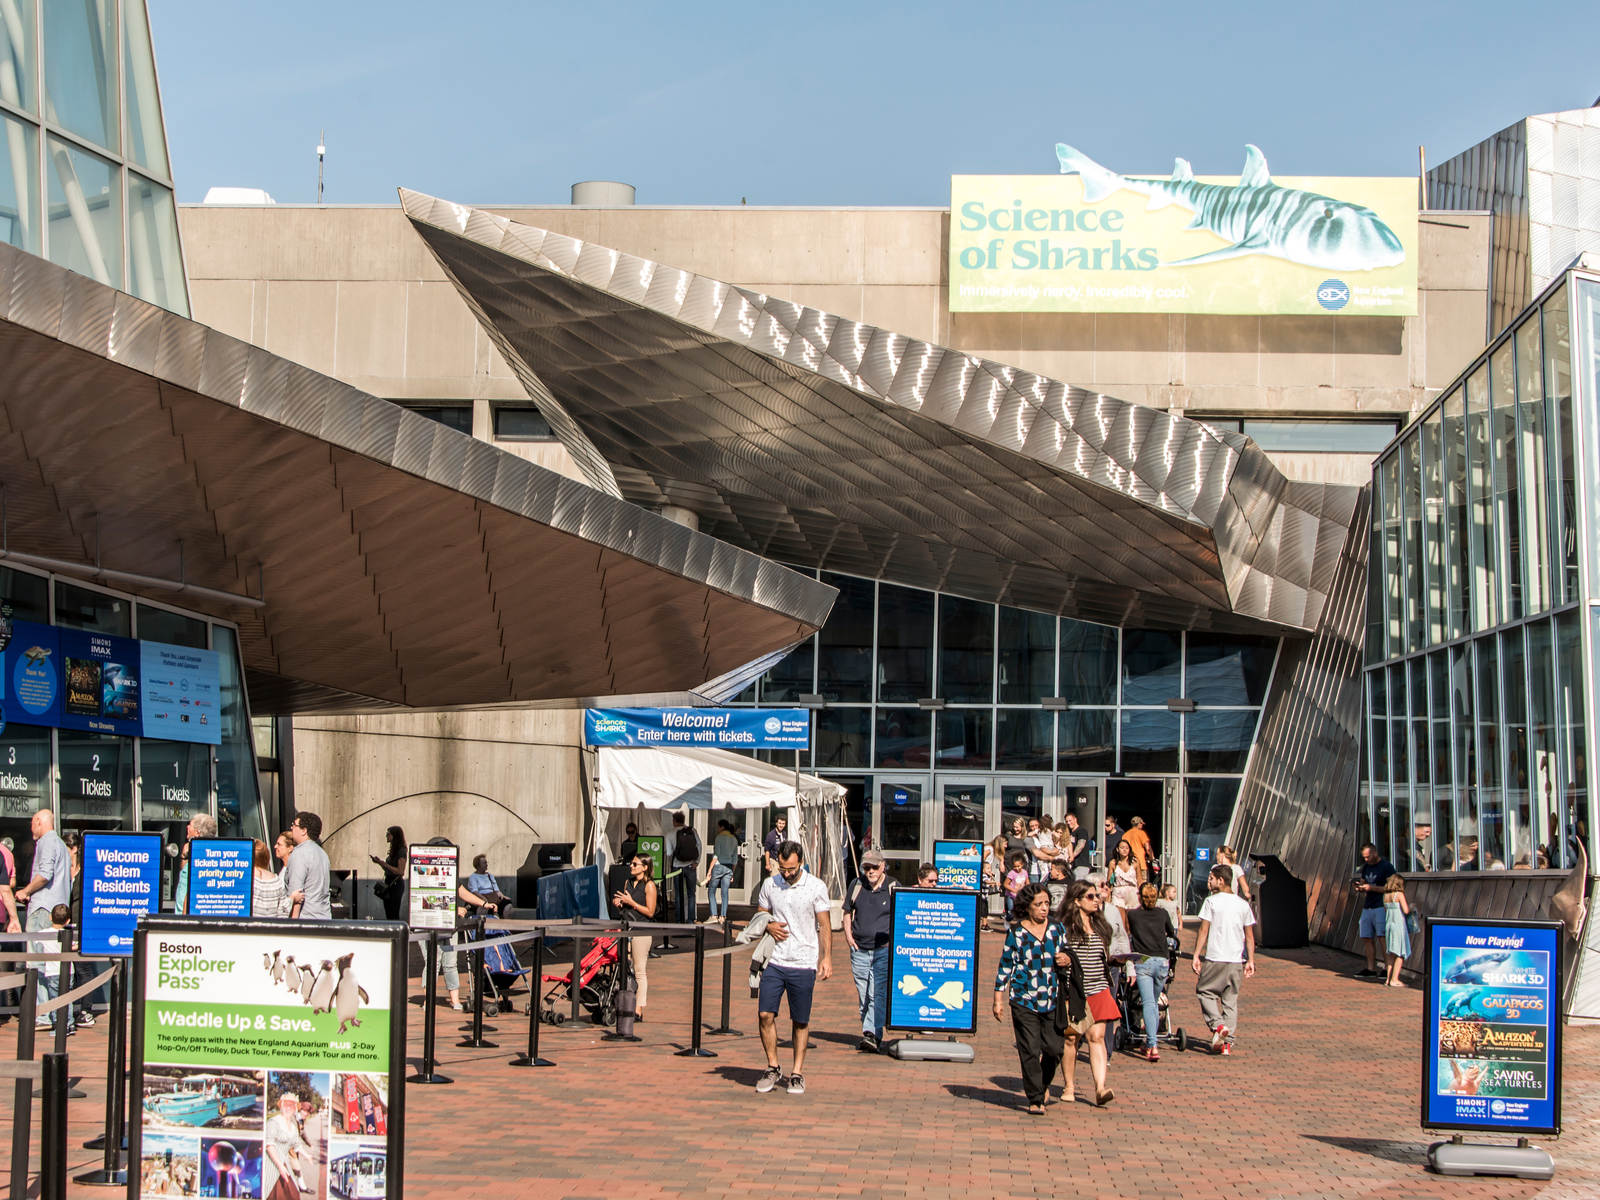 People lining for tickets and exiting the New England Aquarium in Boston, named one of the best aquariums in the US, with its unique architecture and informative signs near the entrance